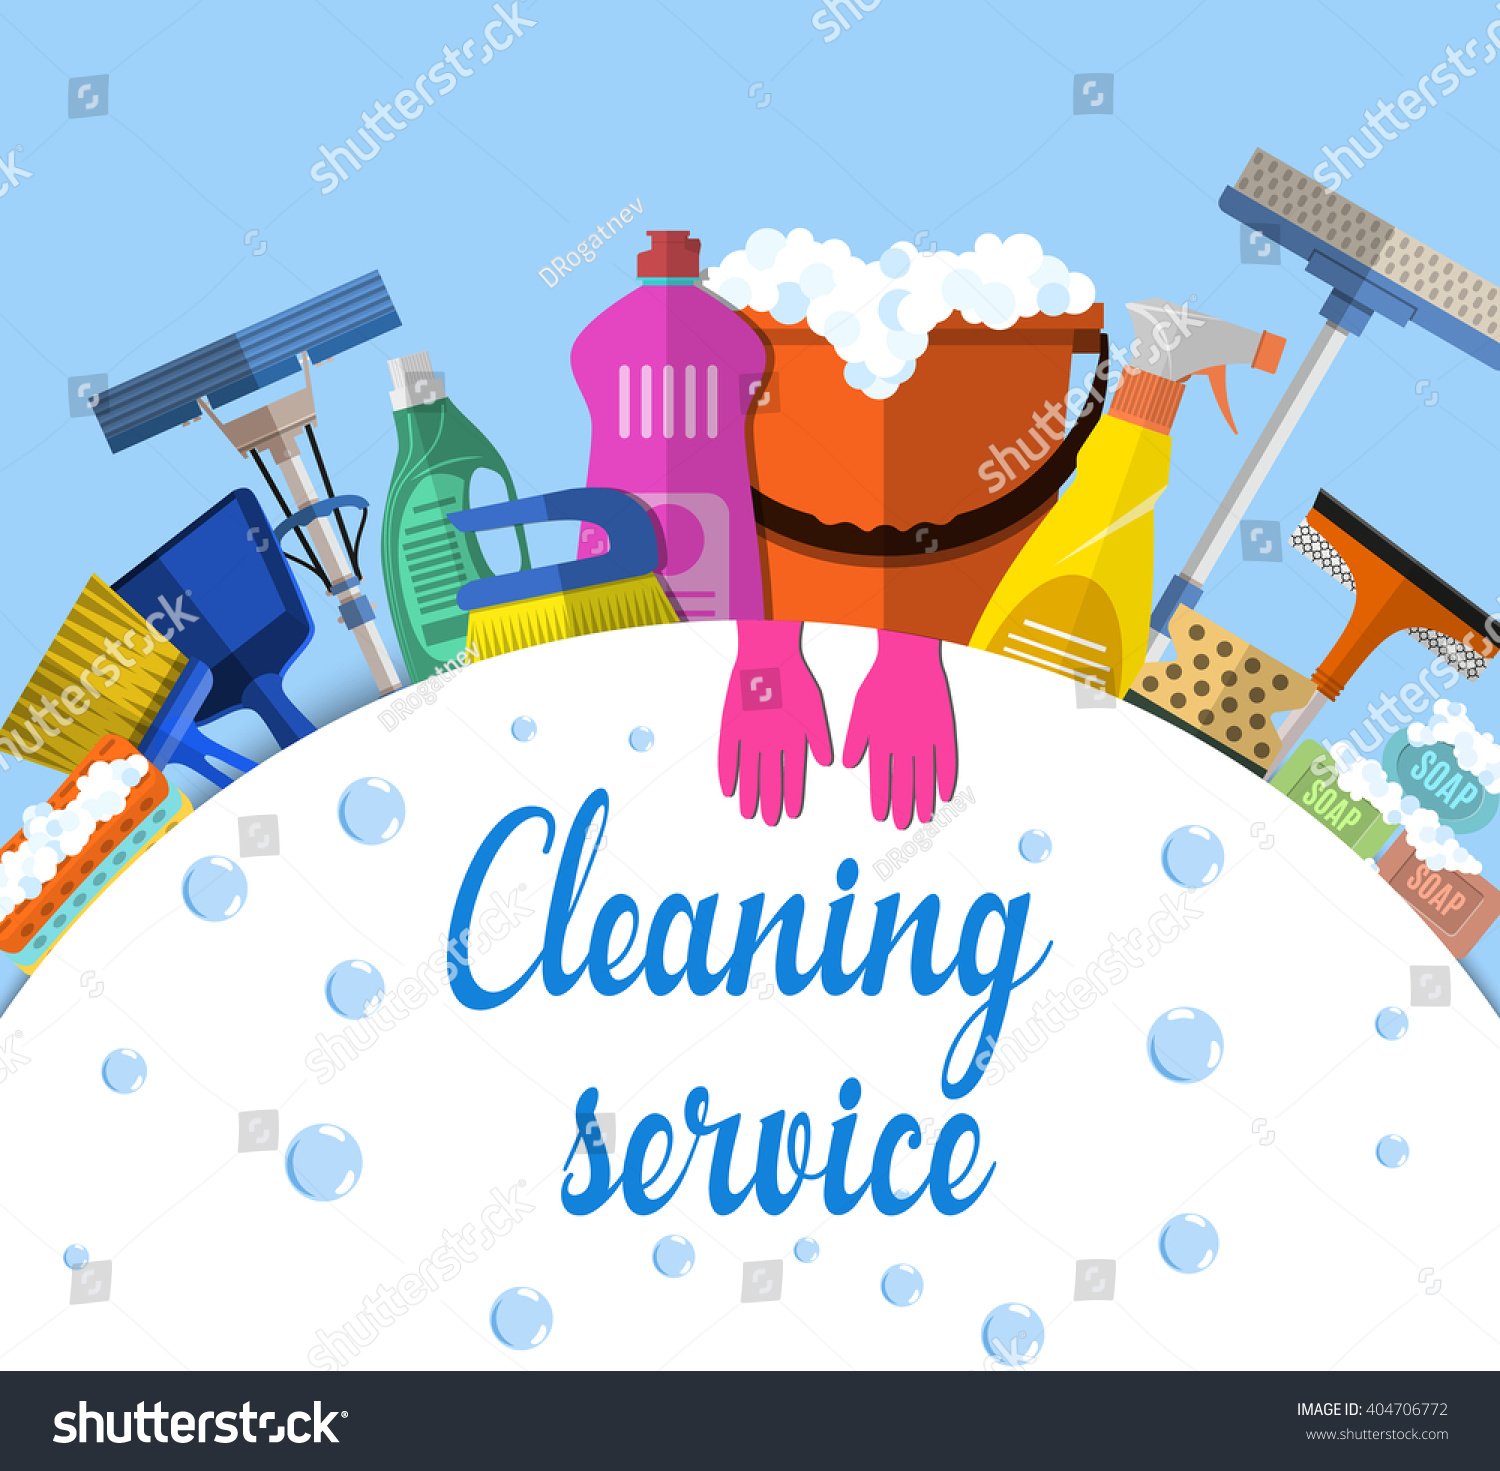 clip art illustrations cleaning - photo #42